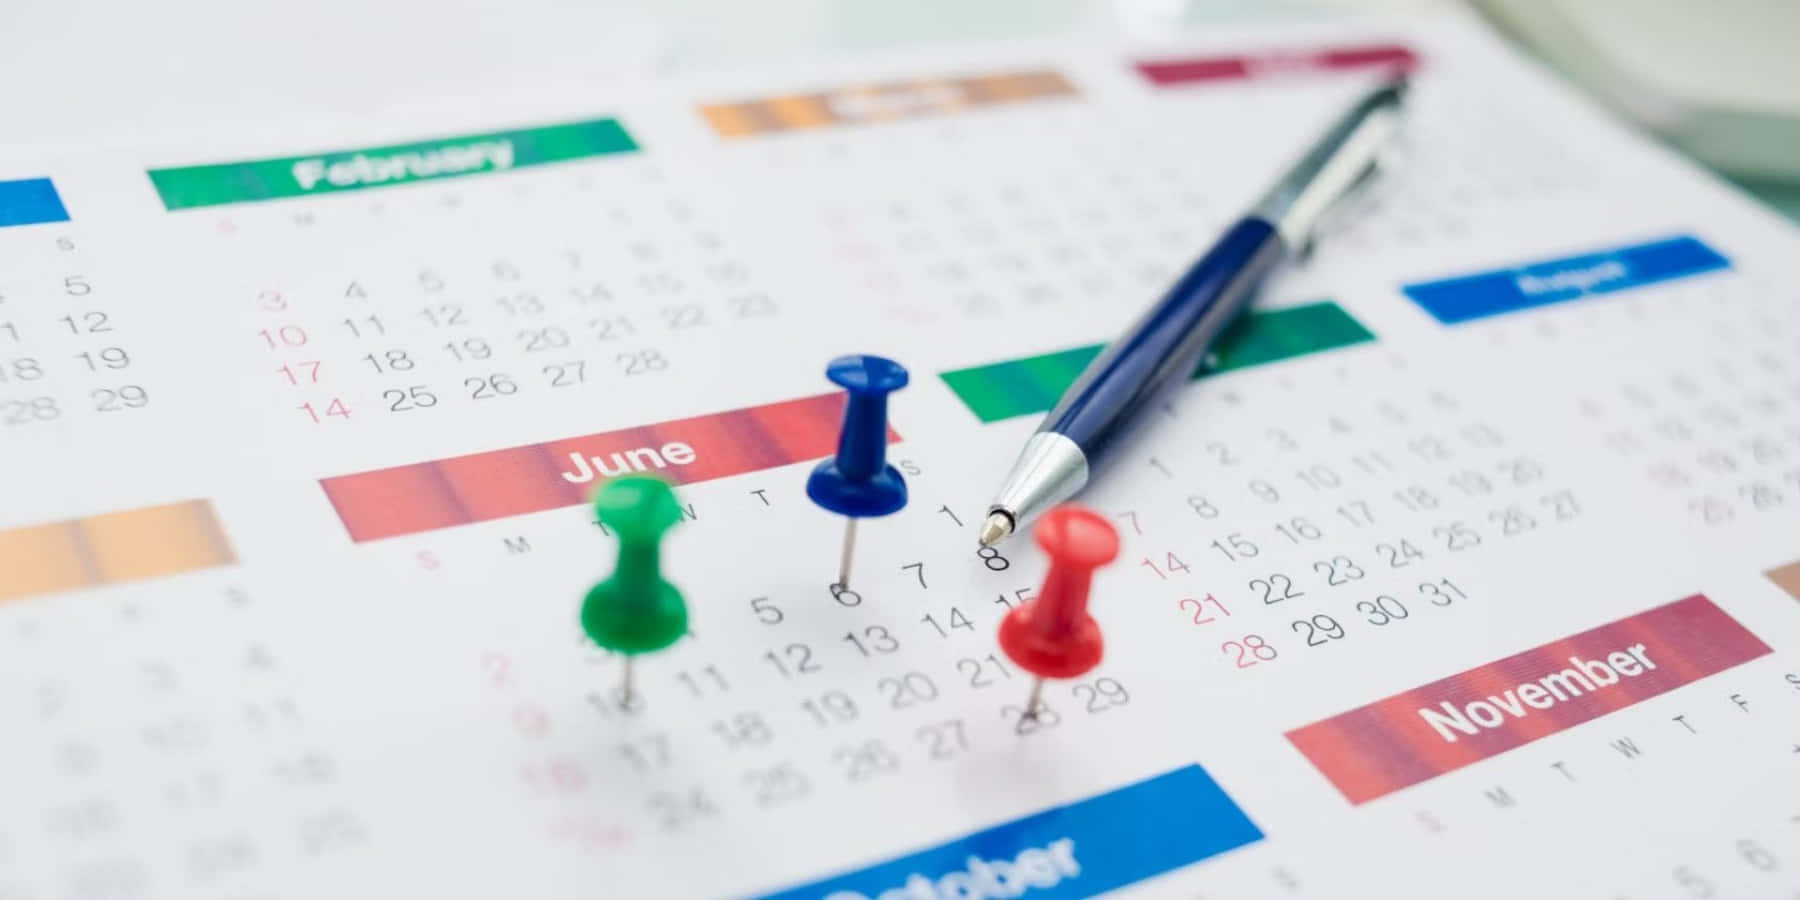 A Calendar With Colored Pins On It